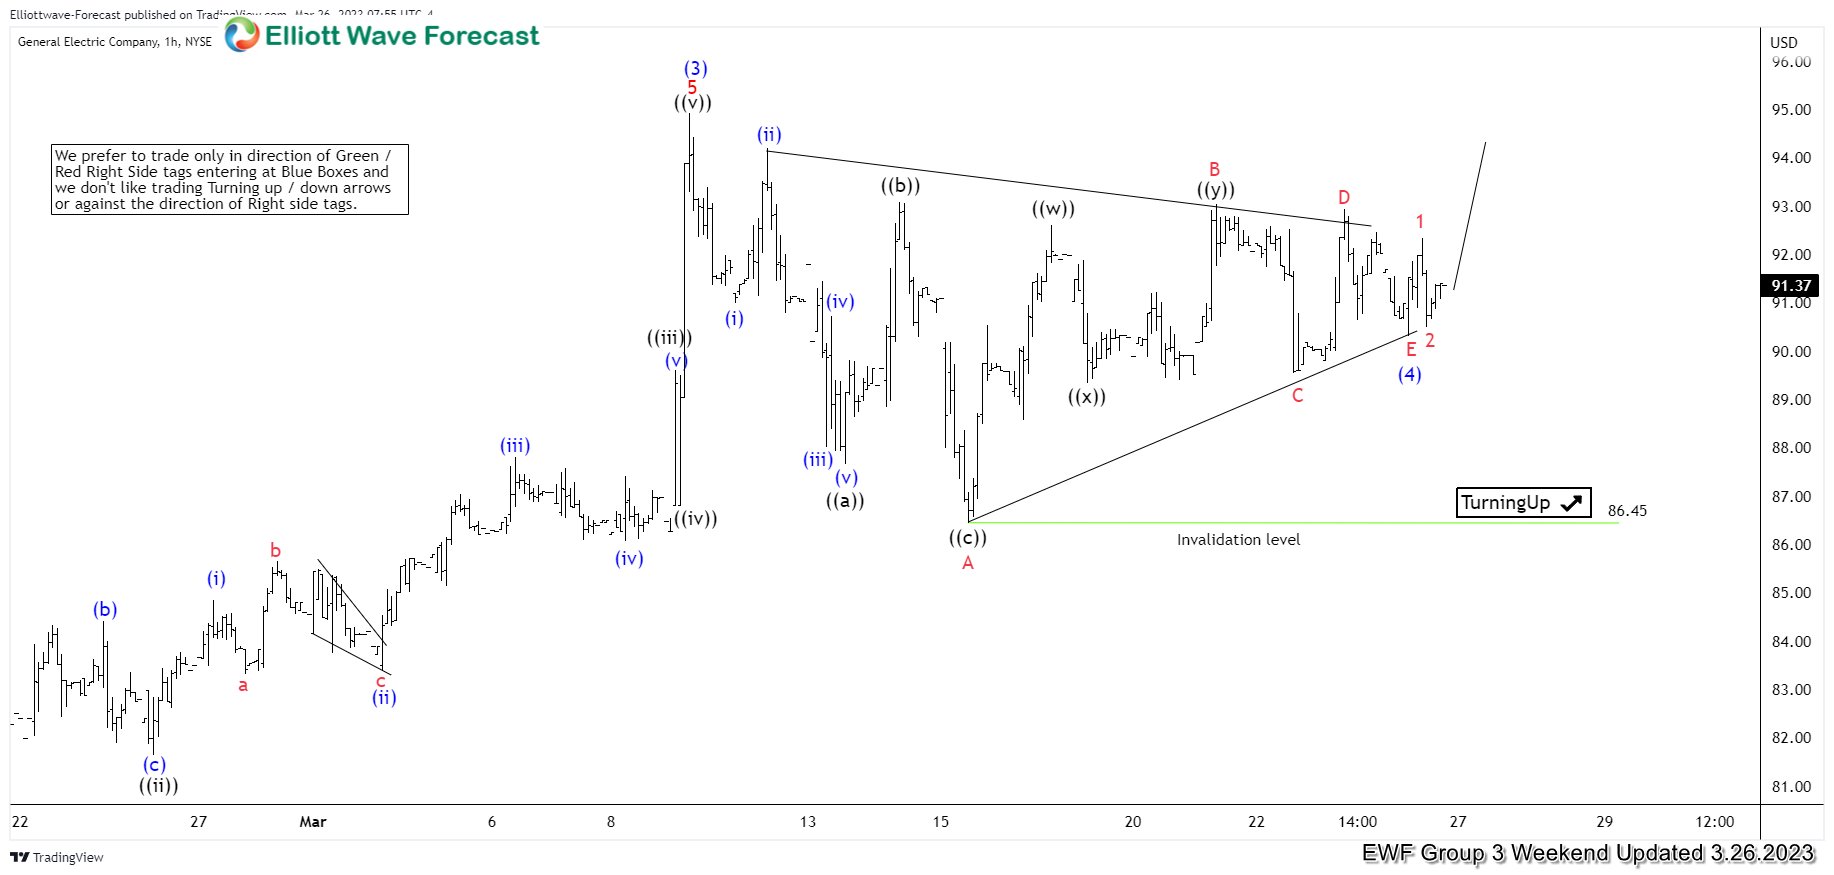 General Electric ( GE ) Continued Rally After Elliott Wave Triangle Pattern